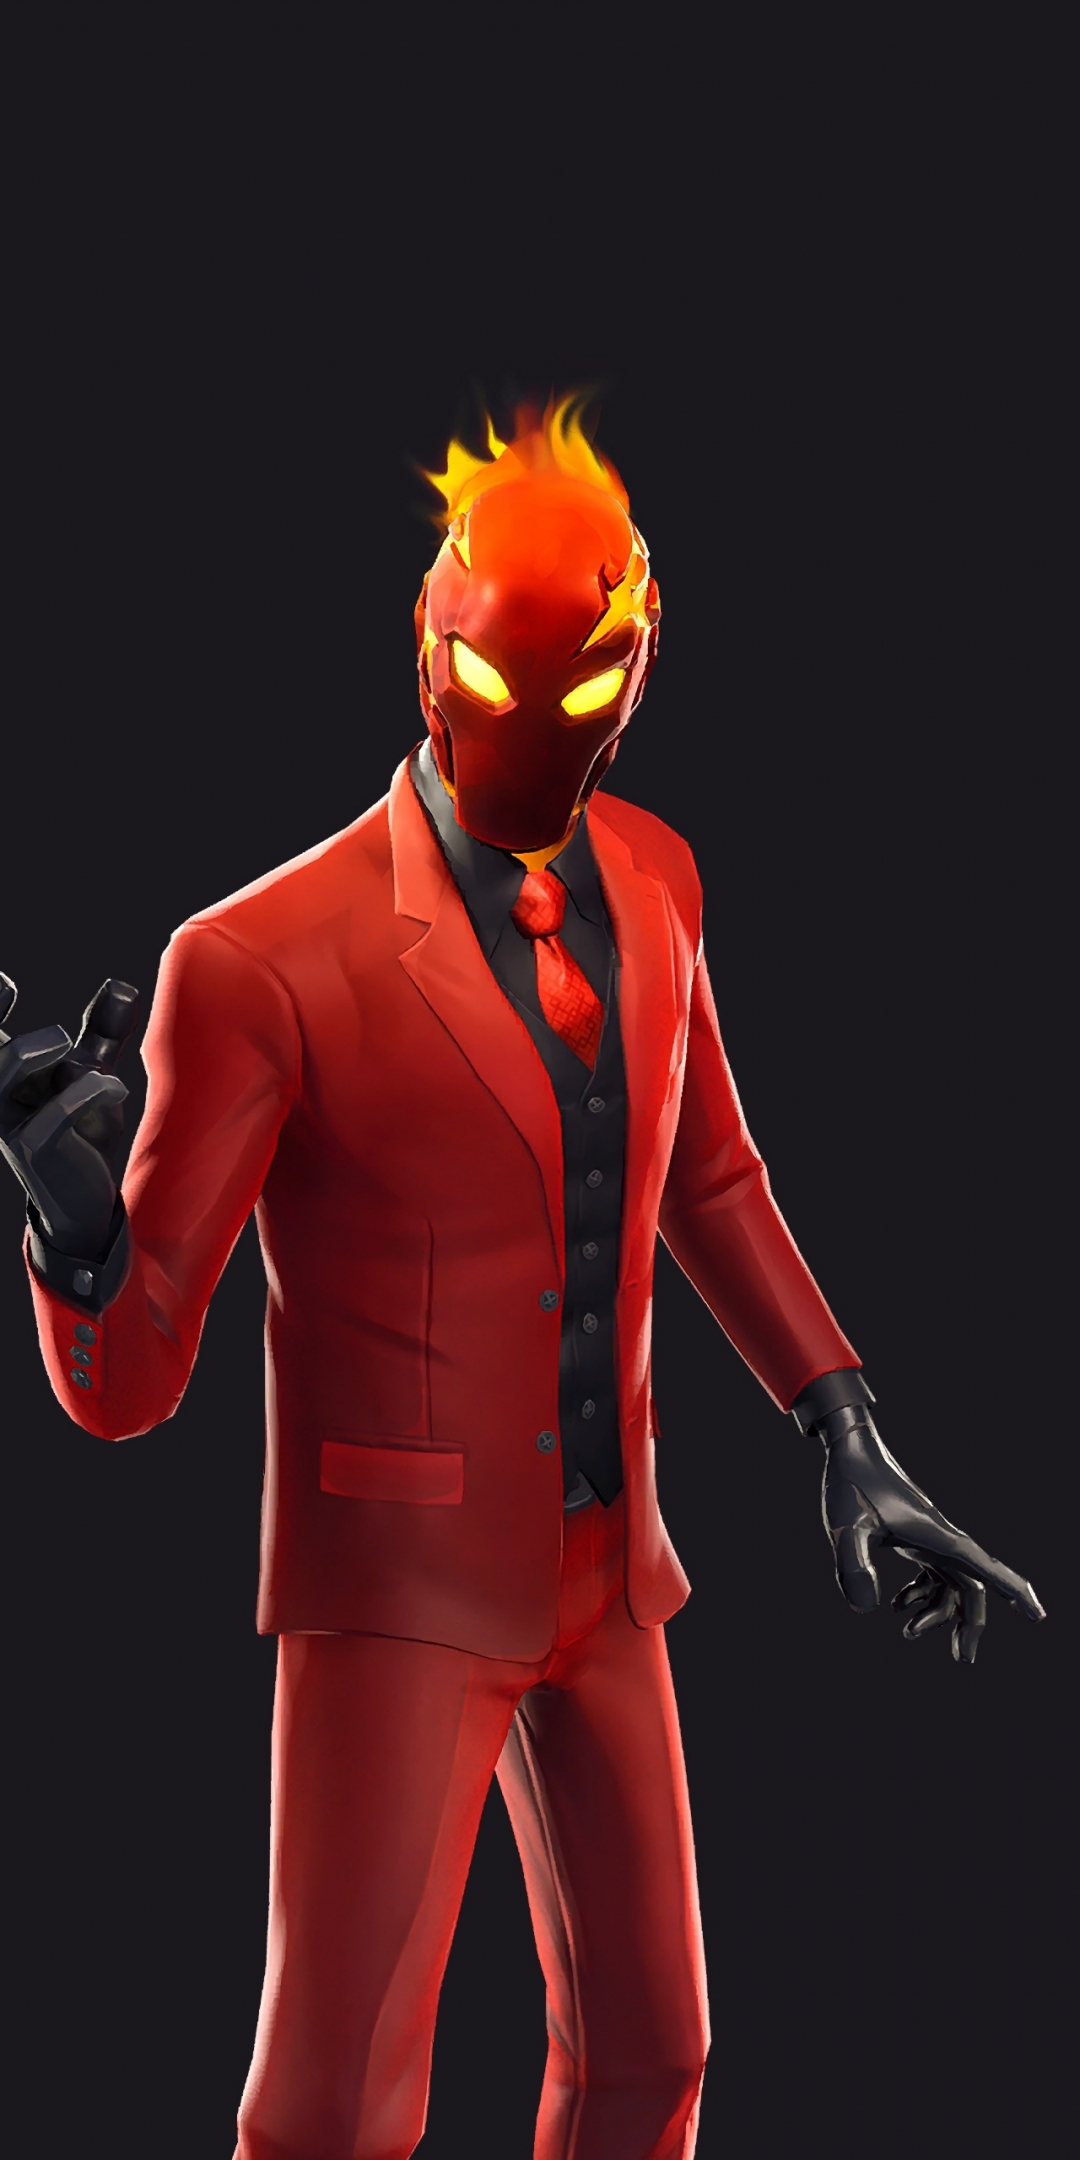 game 2019 red suit inferno fortnite 1080x2160 wallpaper - fortnite honor 9